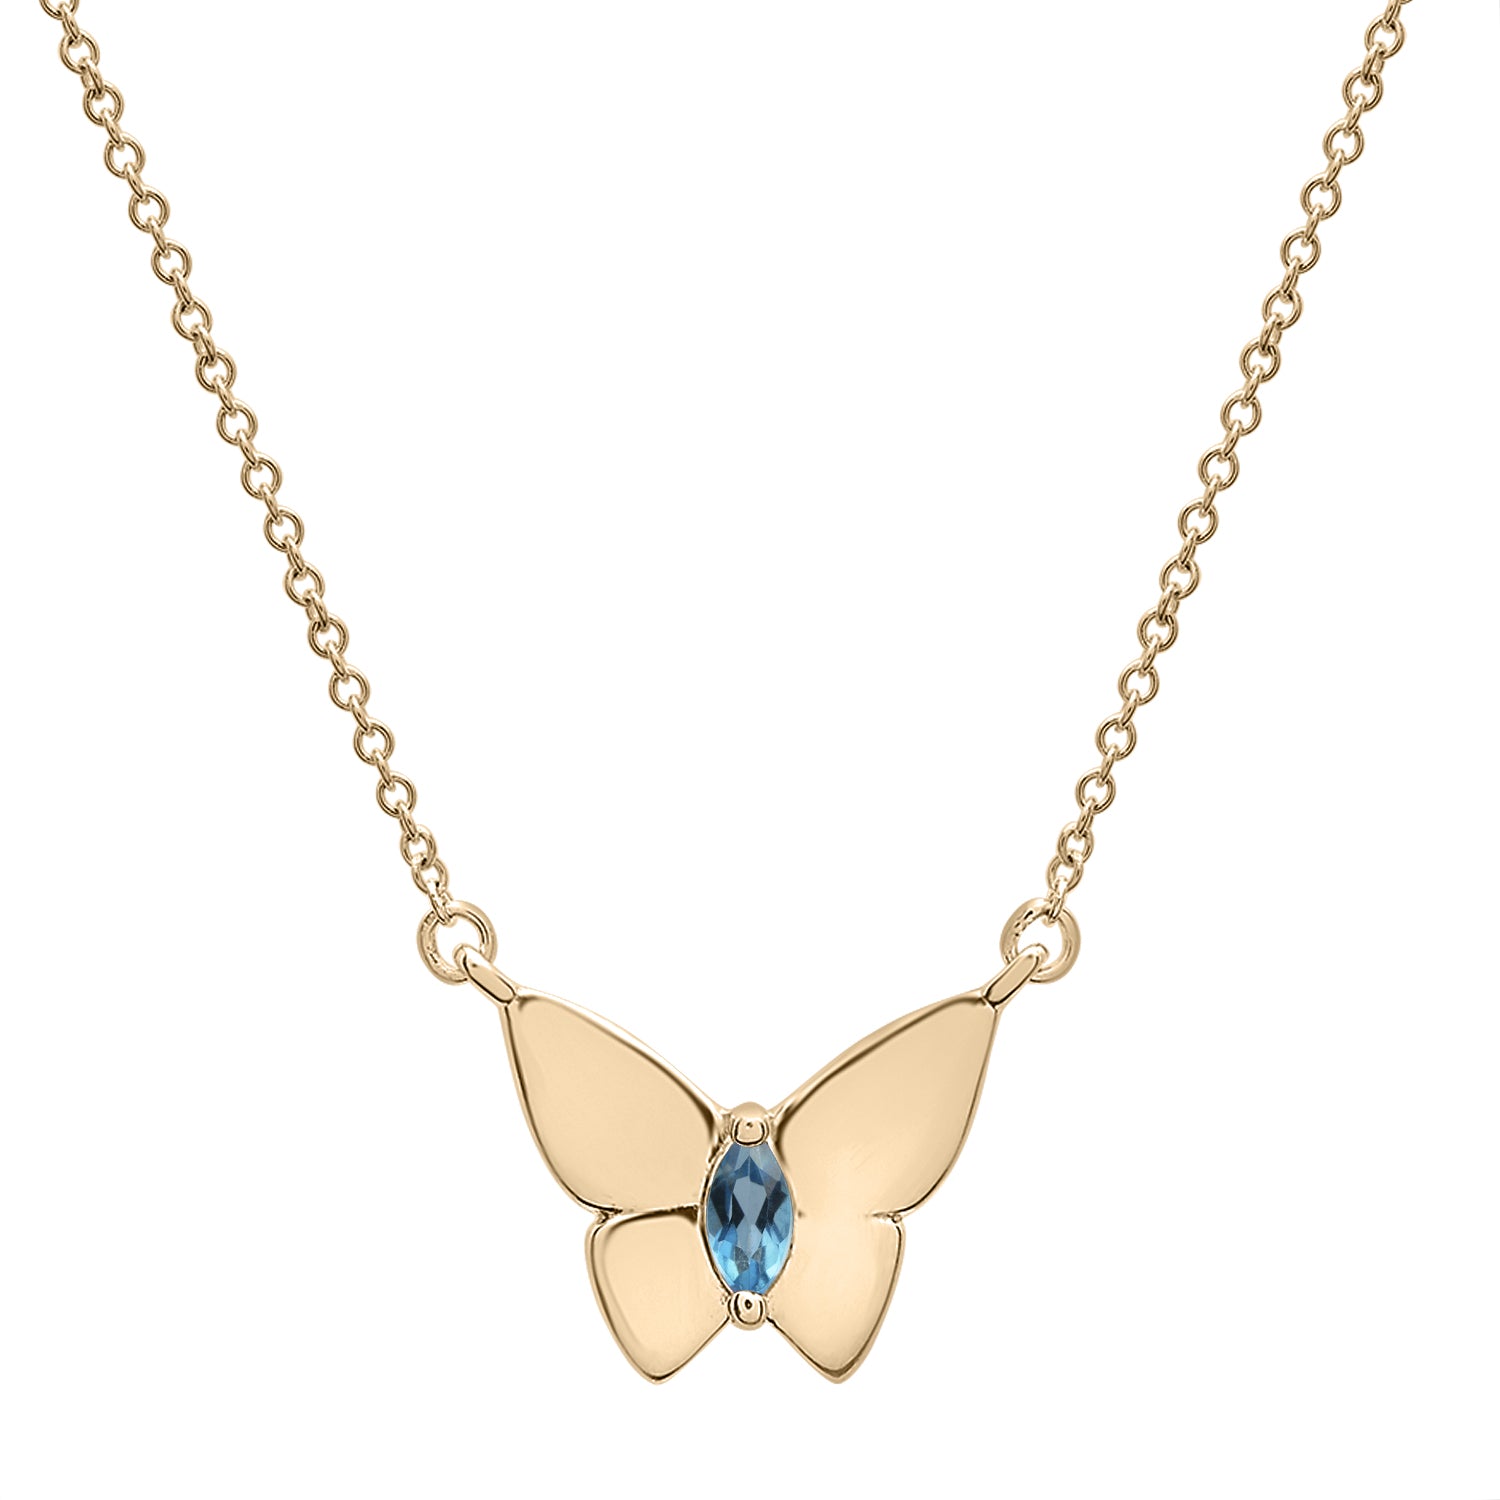 Sky Blue Stone Butterfly Birthstone Necklace in Gold chain